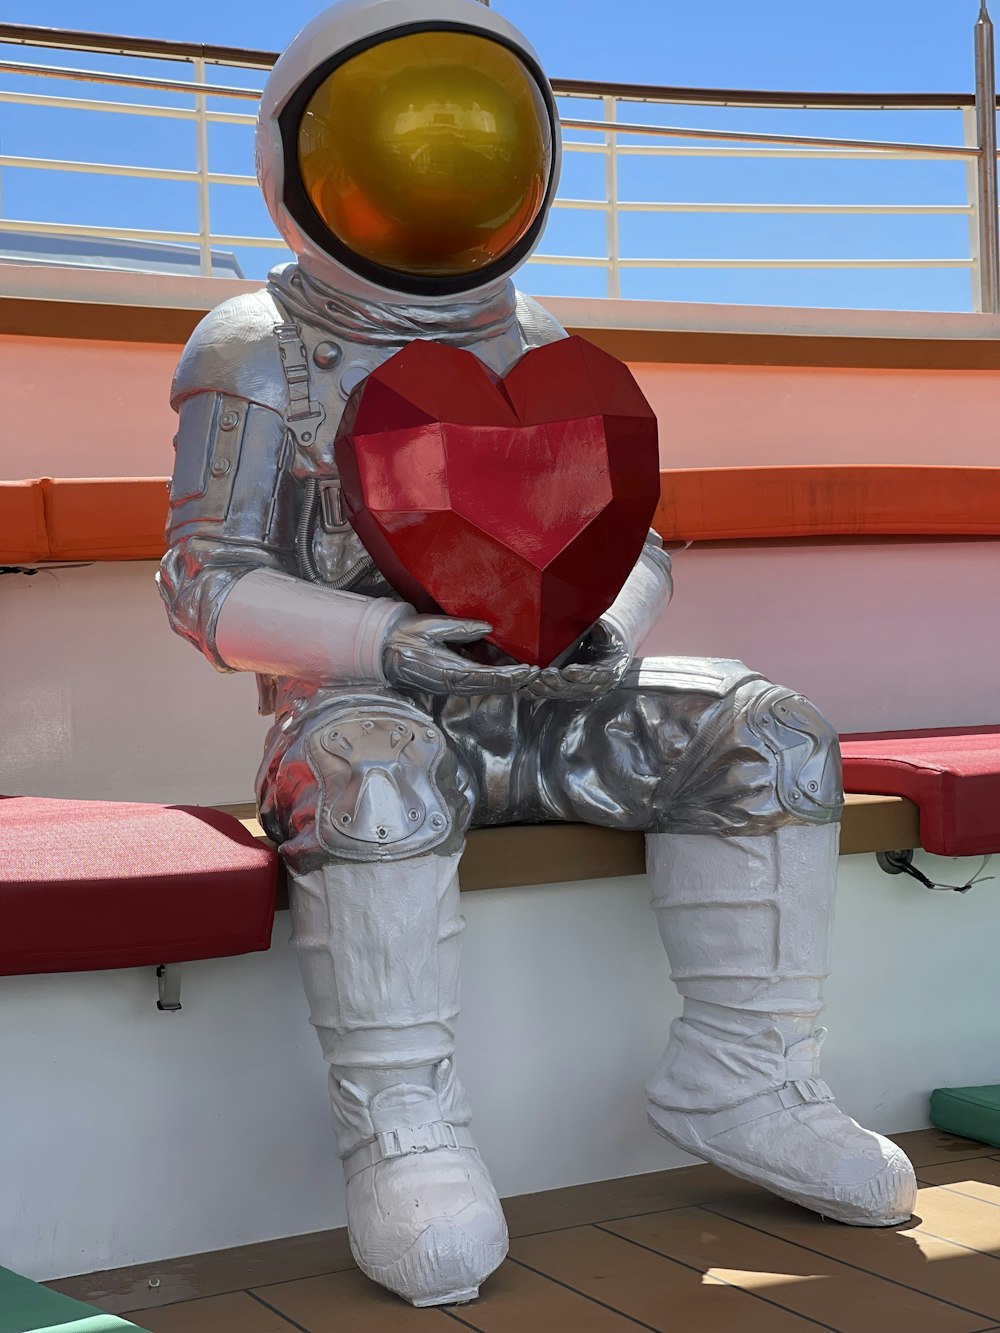 an astronaut sitting on a bench holding a heart